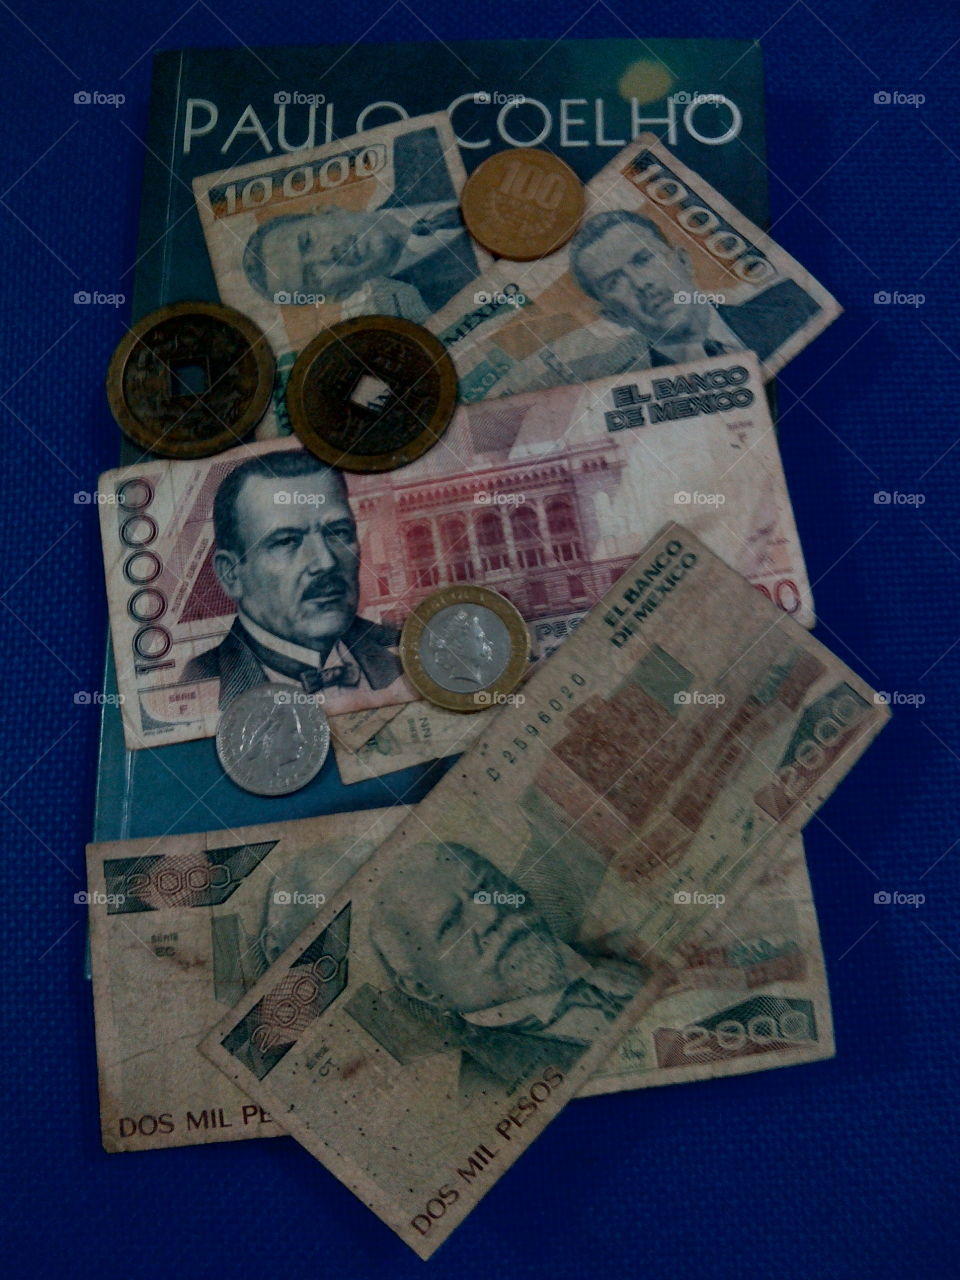 Coins and bills